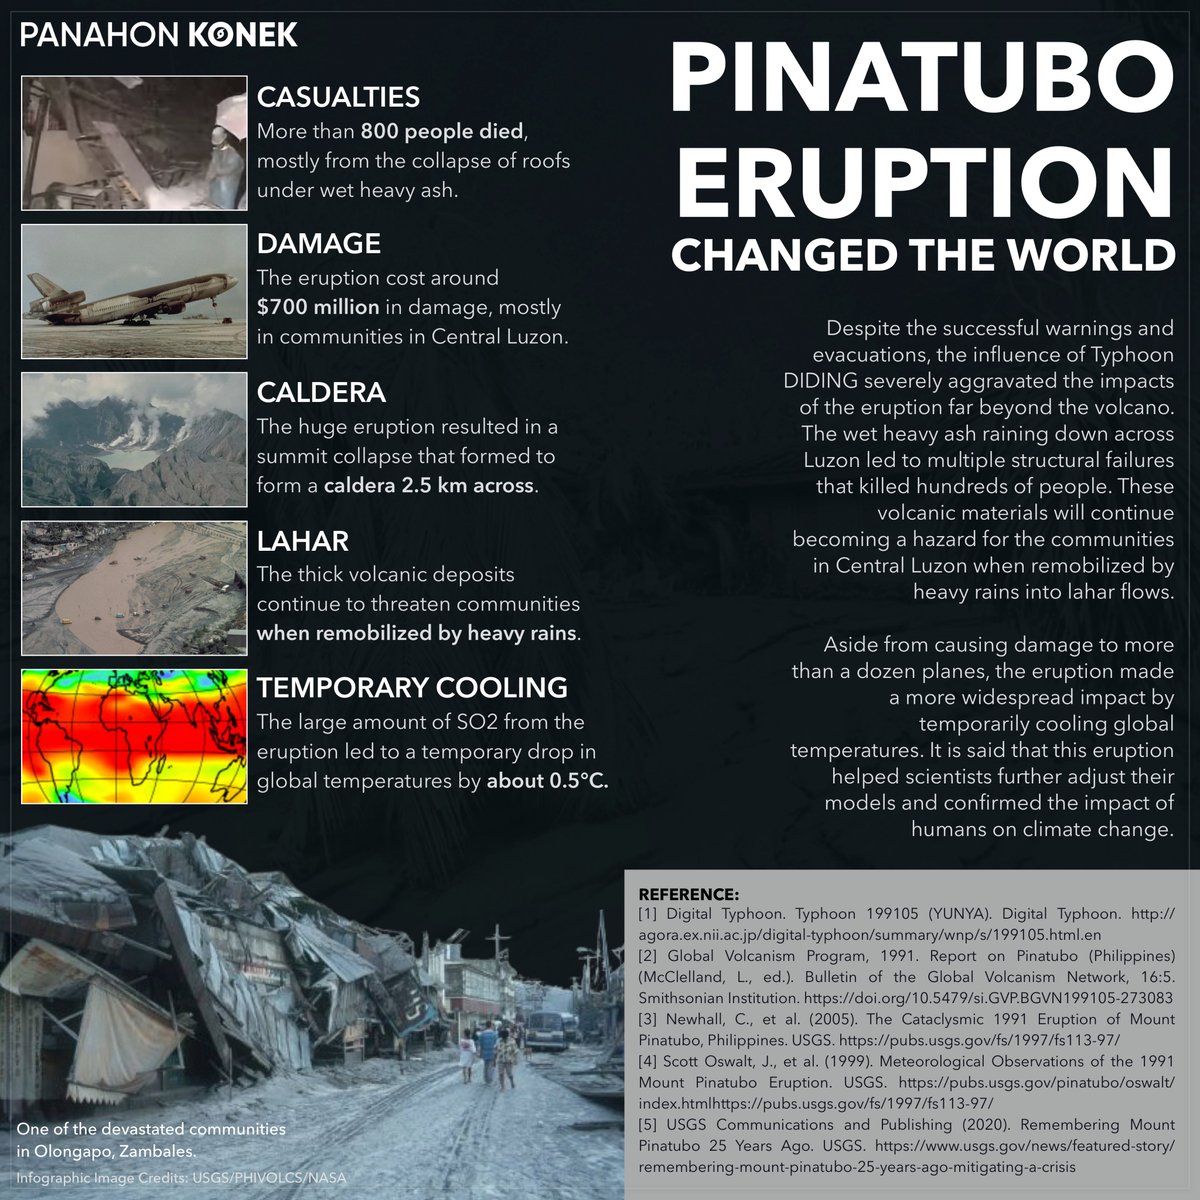 REMEMBERING THE CATACLYSMIC ERUPTION OF PINATUBO🌋  

#OnThisDay in 1991, #Pinatubo had its most violent eruption, considered the world's 2nd largest eruption in the 20th century. It coincided with the passage of Typhoon DIDING across Central Luzon.

Read: bit.ly/442lWie